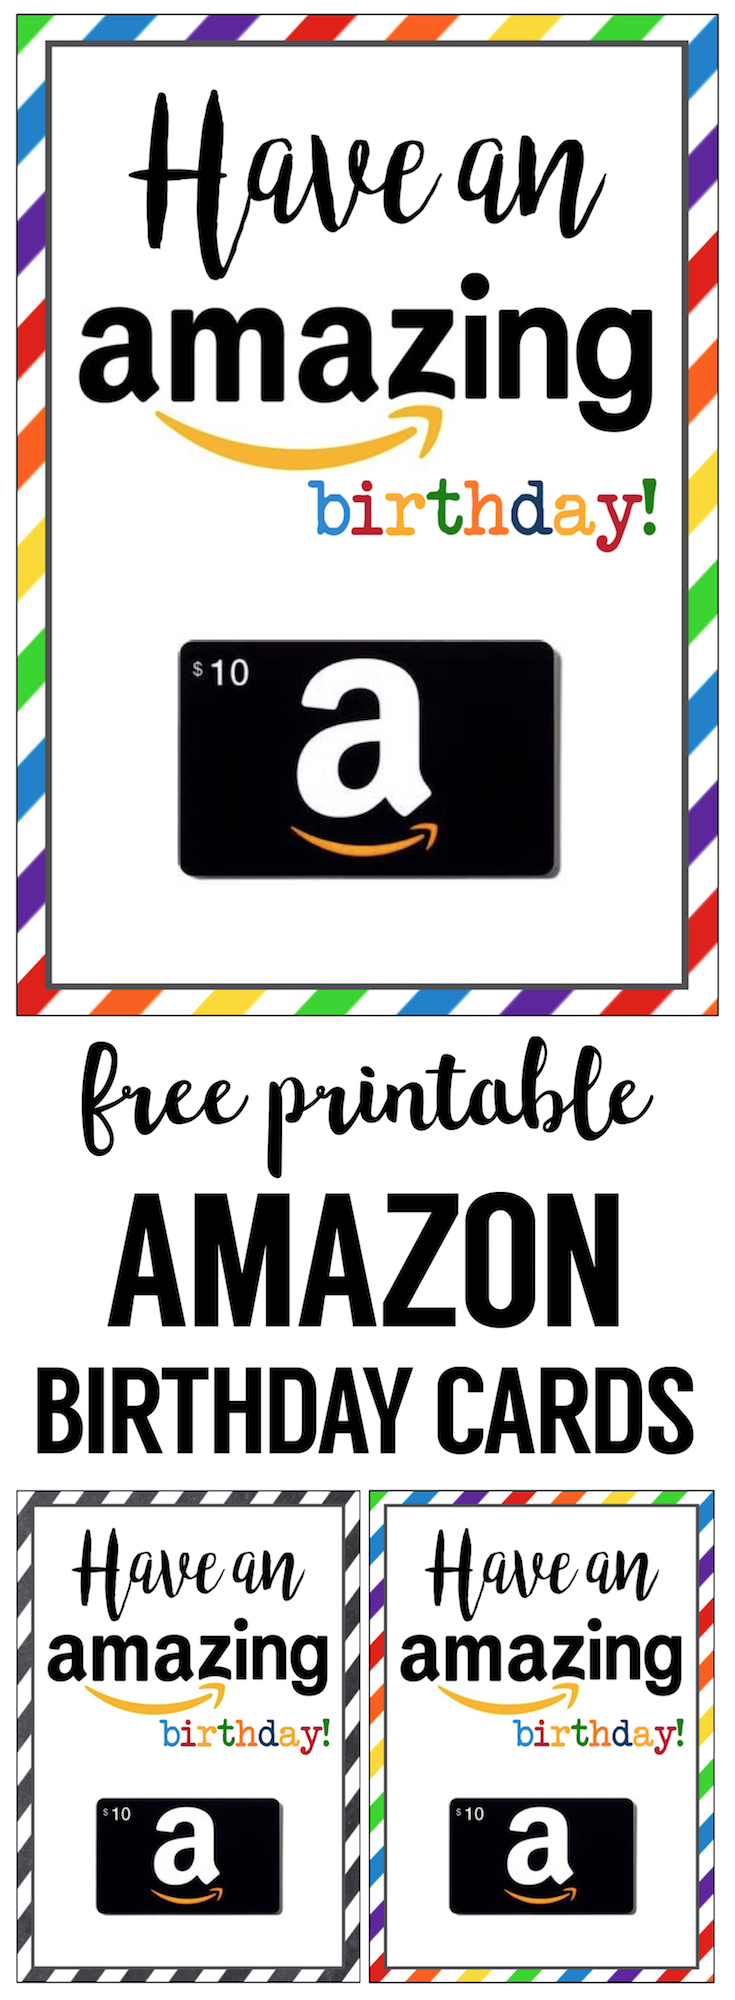 Amazon Birthday Cards Free Printable. Purchase an amazon birthday gift card and pair it with our happy birthday card printable. Easy DIY gift they'll love.